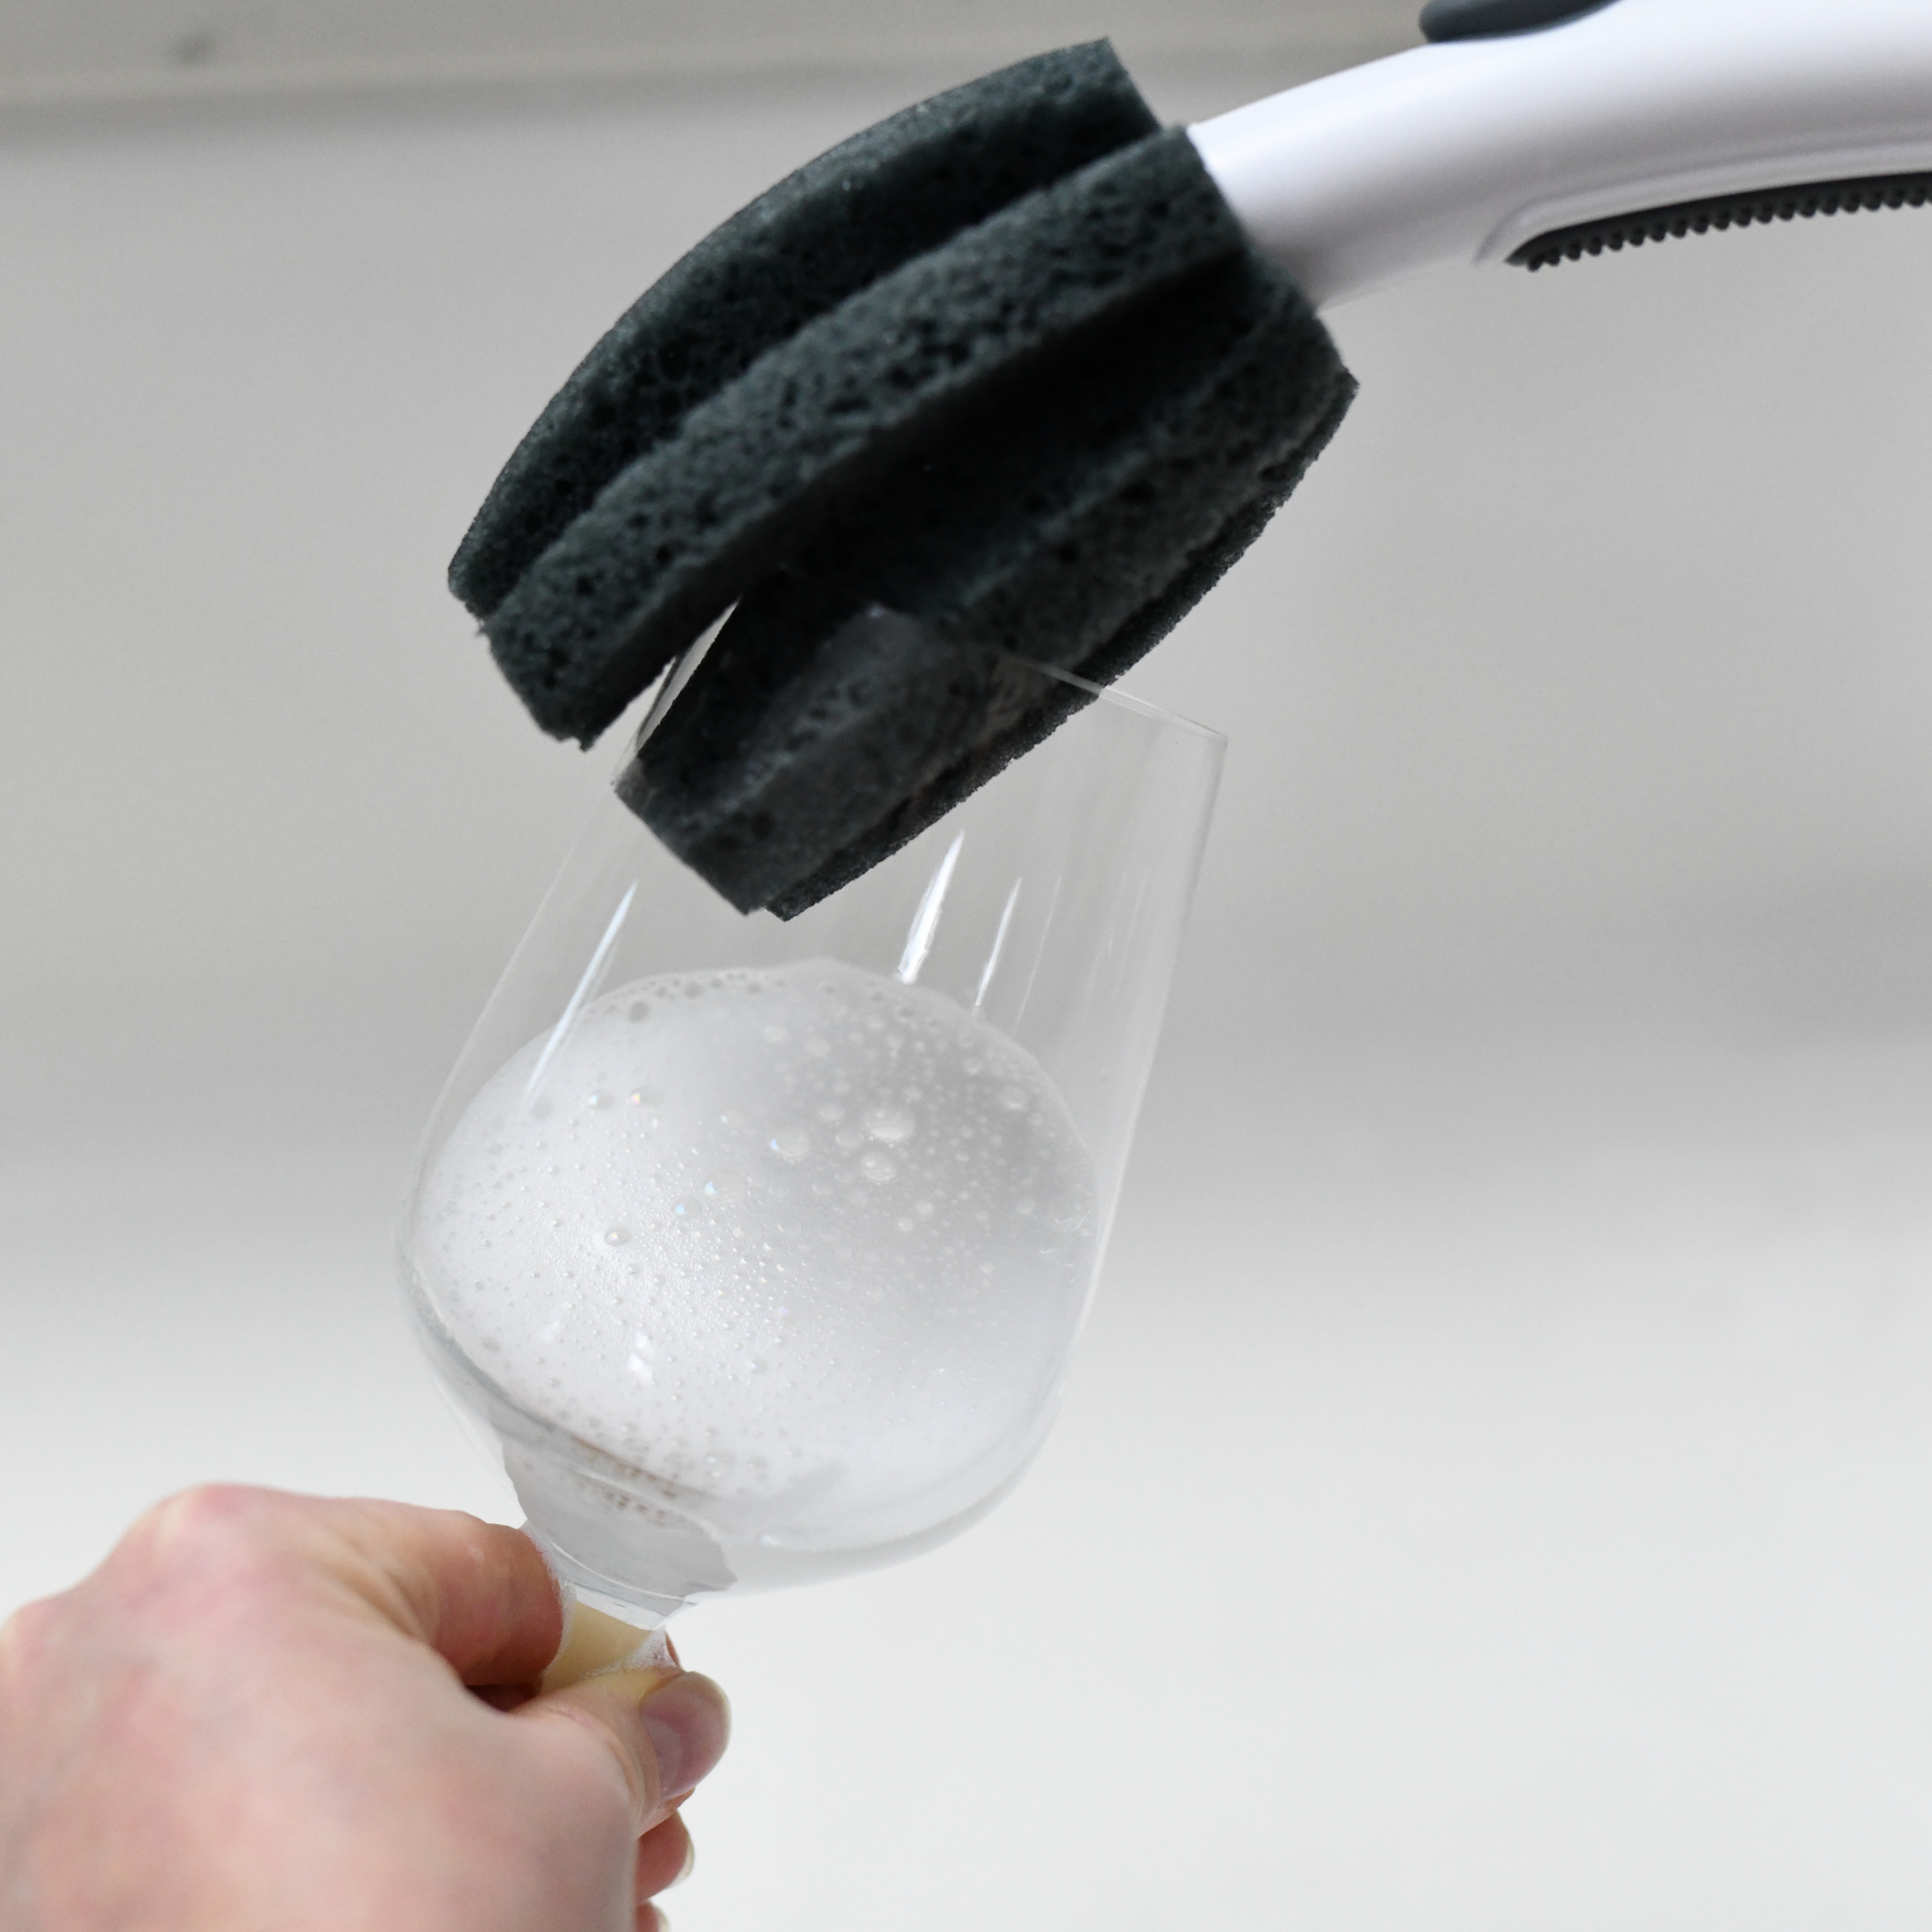 The WINE Brush has a specially designed spinning head to easily and safely clean your wine glasses